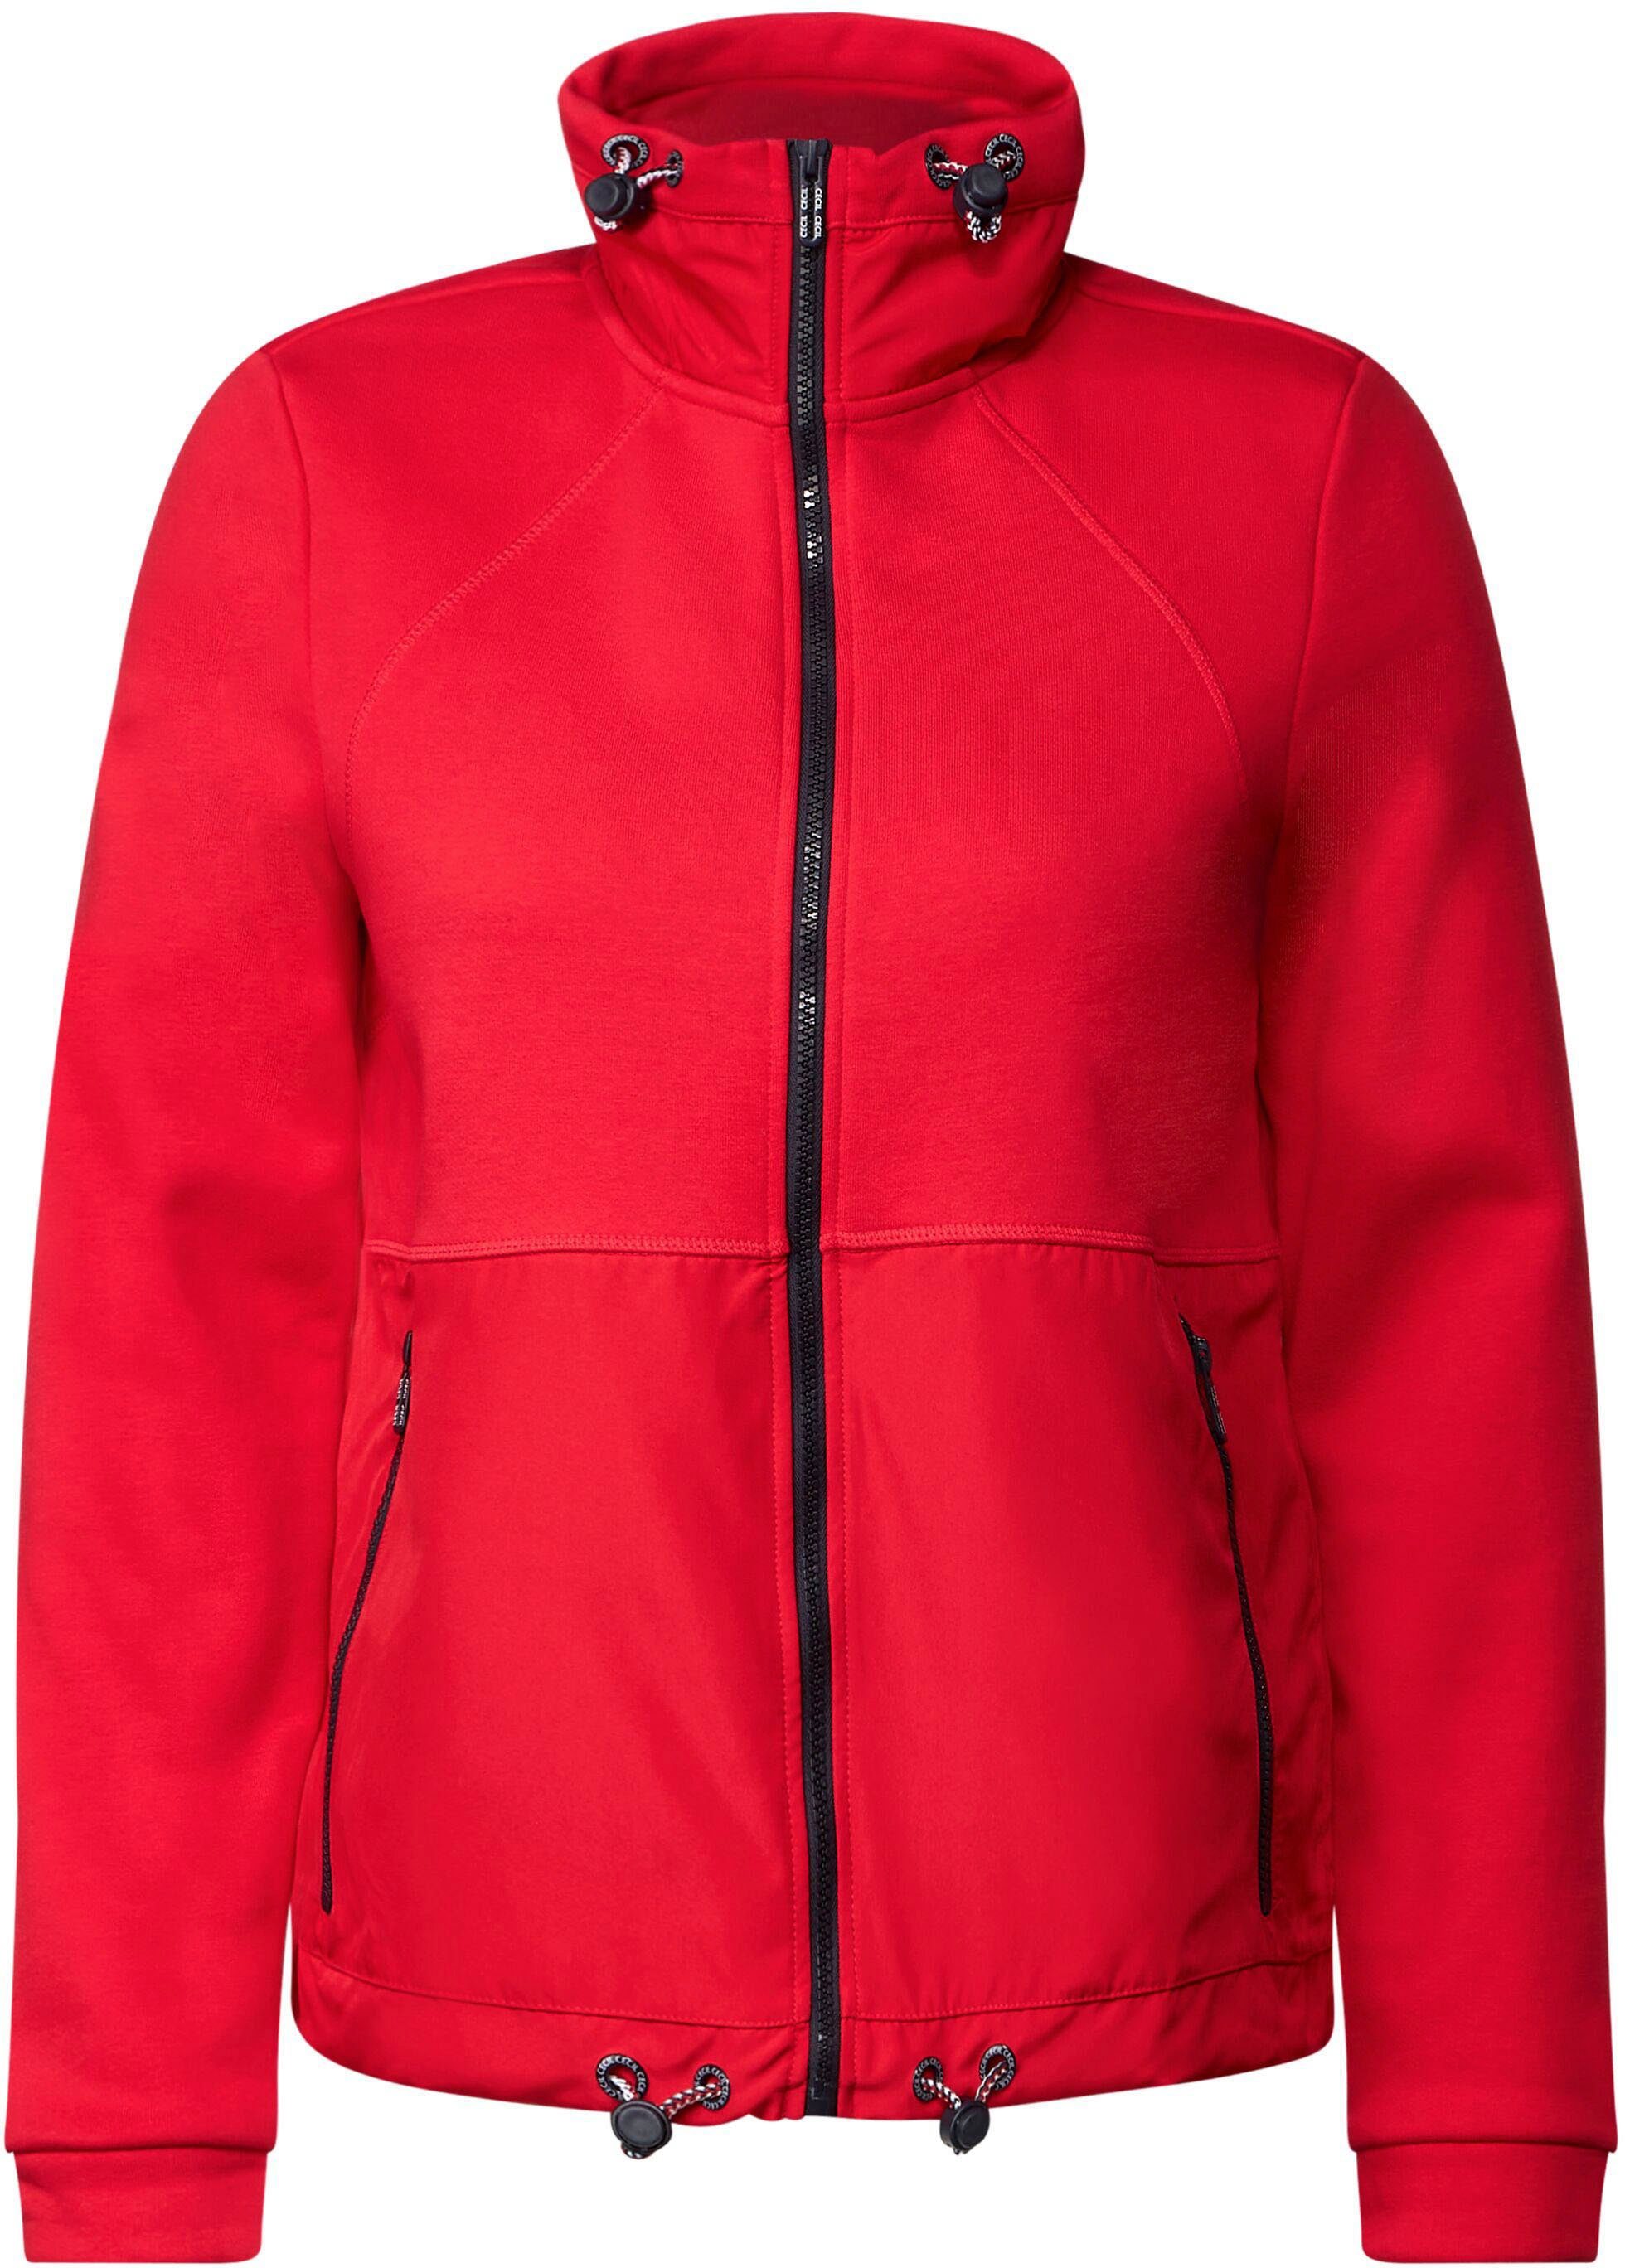 Cecil Sweatjacke im modernen red strong Materialmix